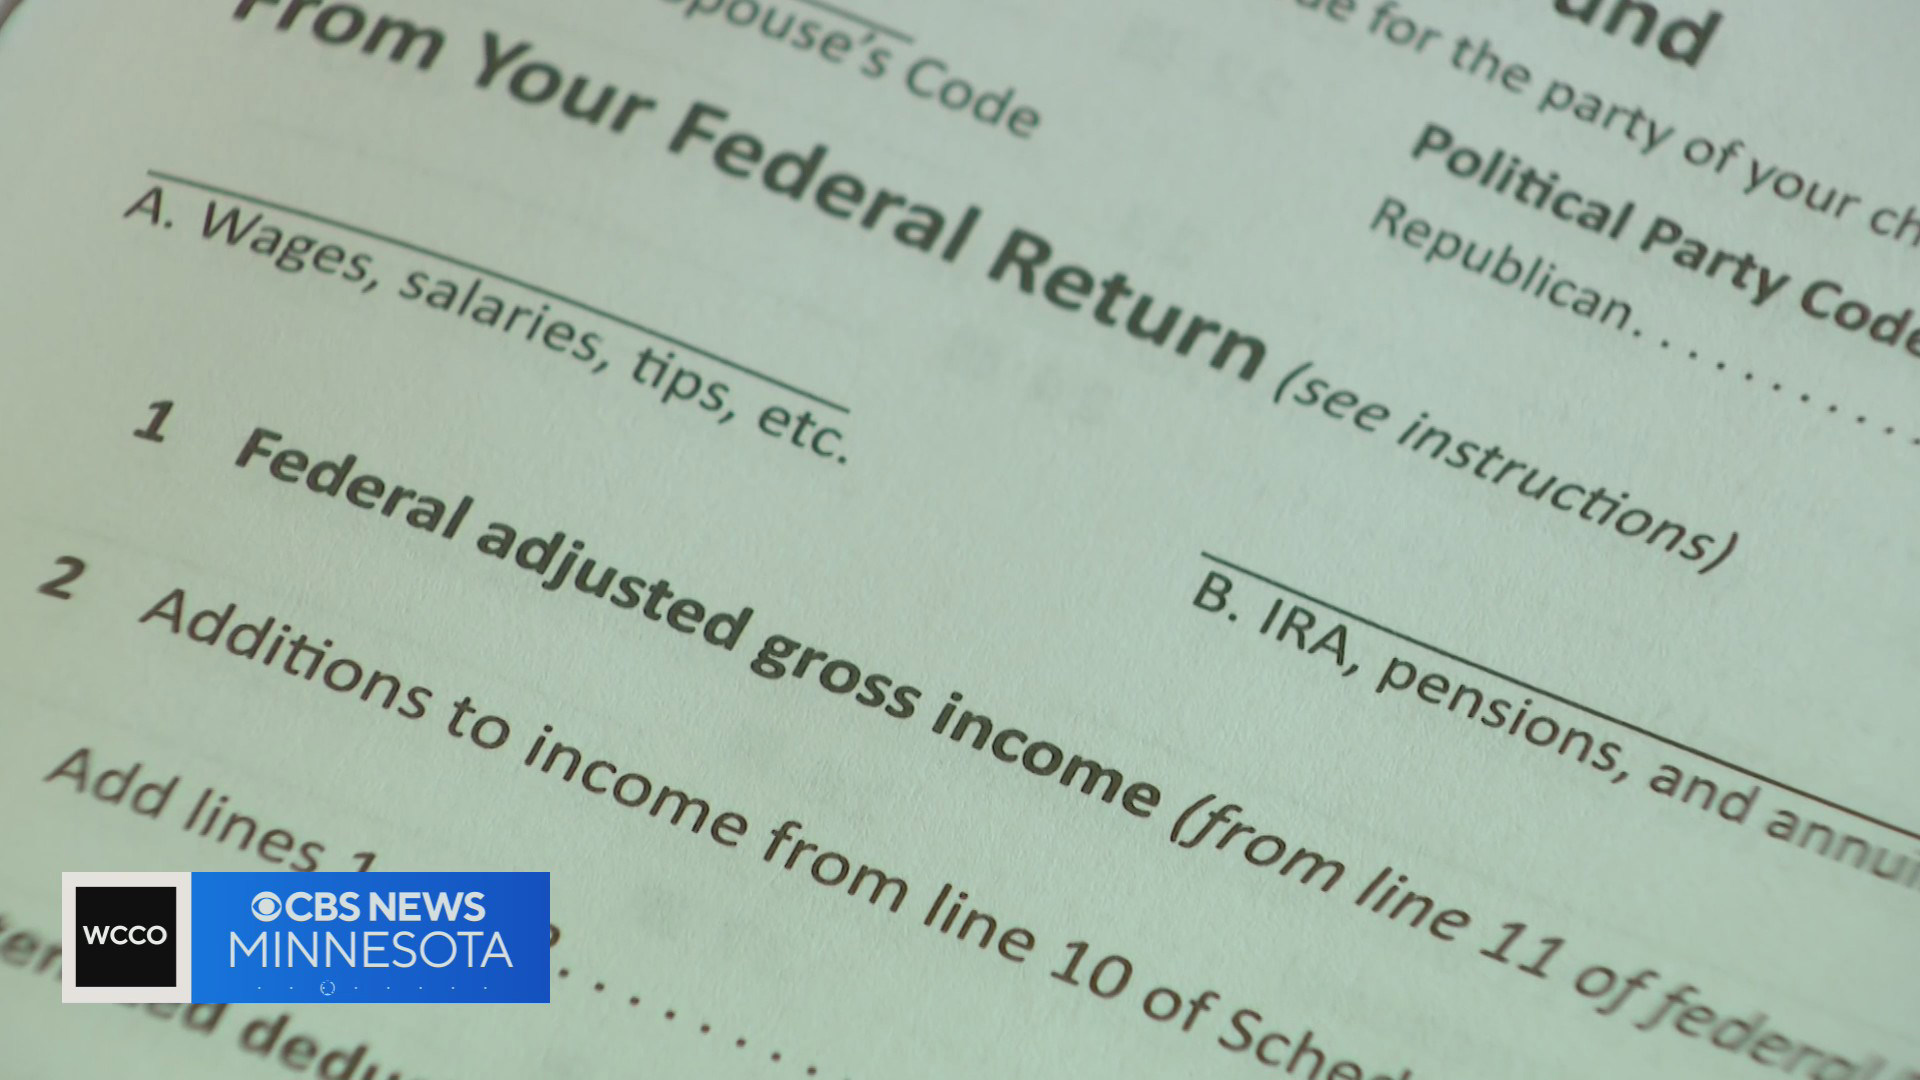 tax-rebate-checks-what-eligible-recipients-need-to-know